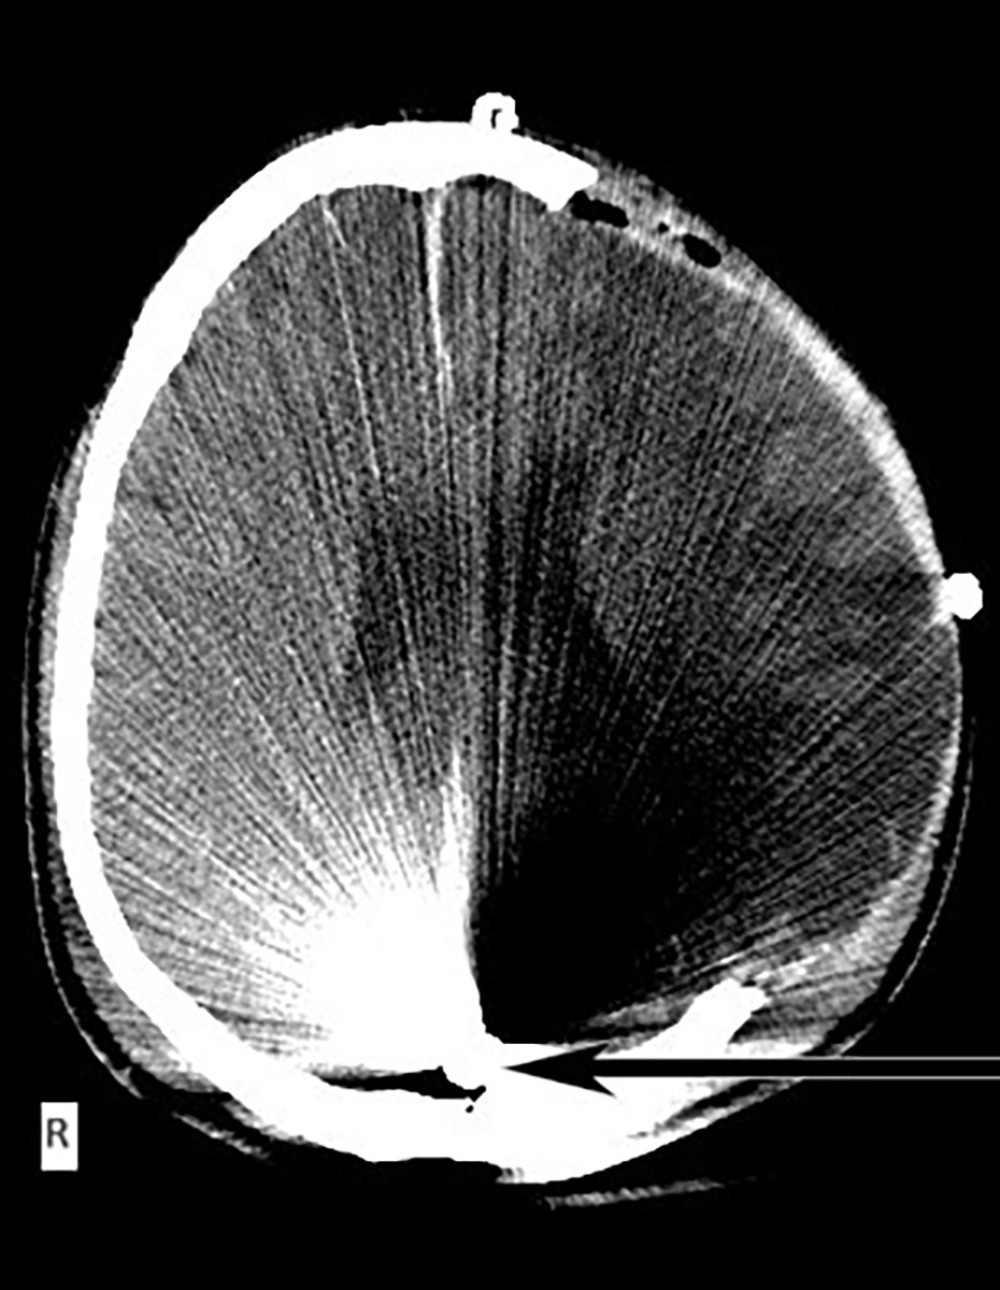 Postoperative axial computed tomography scan. Postoperative findings after left decompressive craniectomy, extensive cerebral edema of the left hemisphere. The projectile that was previously mentioned can be identified at the occipital lobe, as it was not extracted, pointed by the arrow.